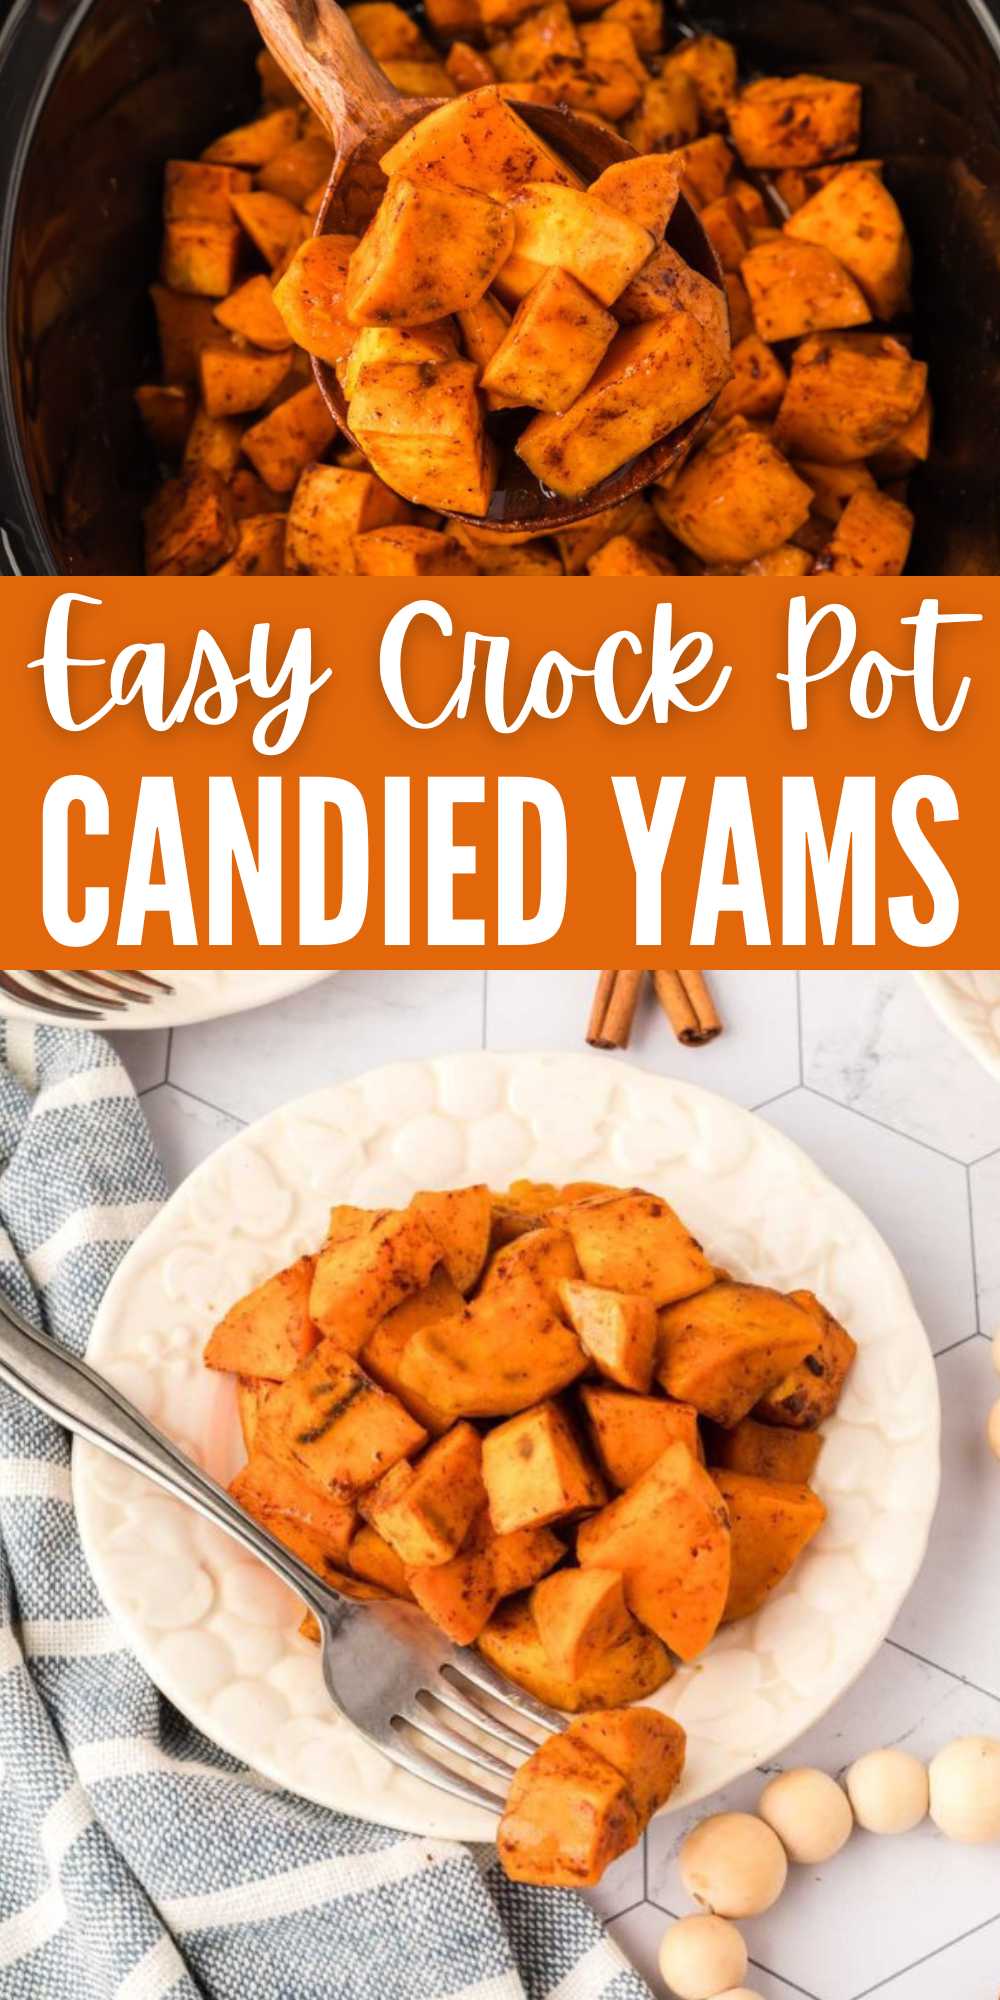 Make Crock Pot Candied Yams this holiday to save oven space. The slow cooker cooks the candied yams and keeps them warm while serving. These yams are perfect for the holidays, but we have even made them through out the year. These easy instructions will allow you to have more family time. #eatingonadime #crockpotcandiedyam #candiedyams